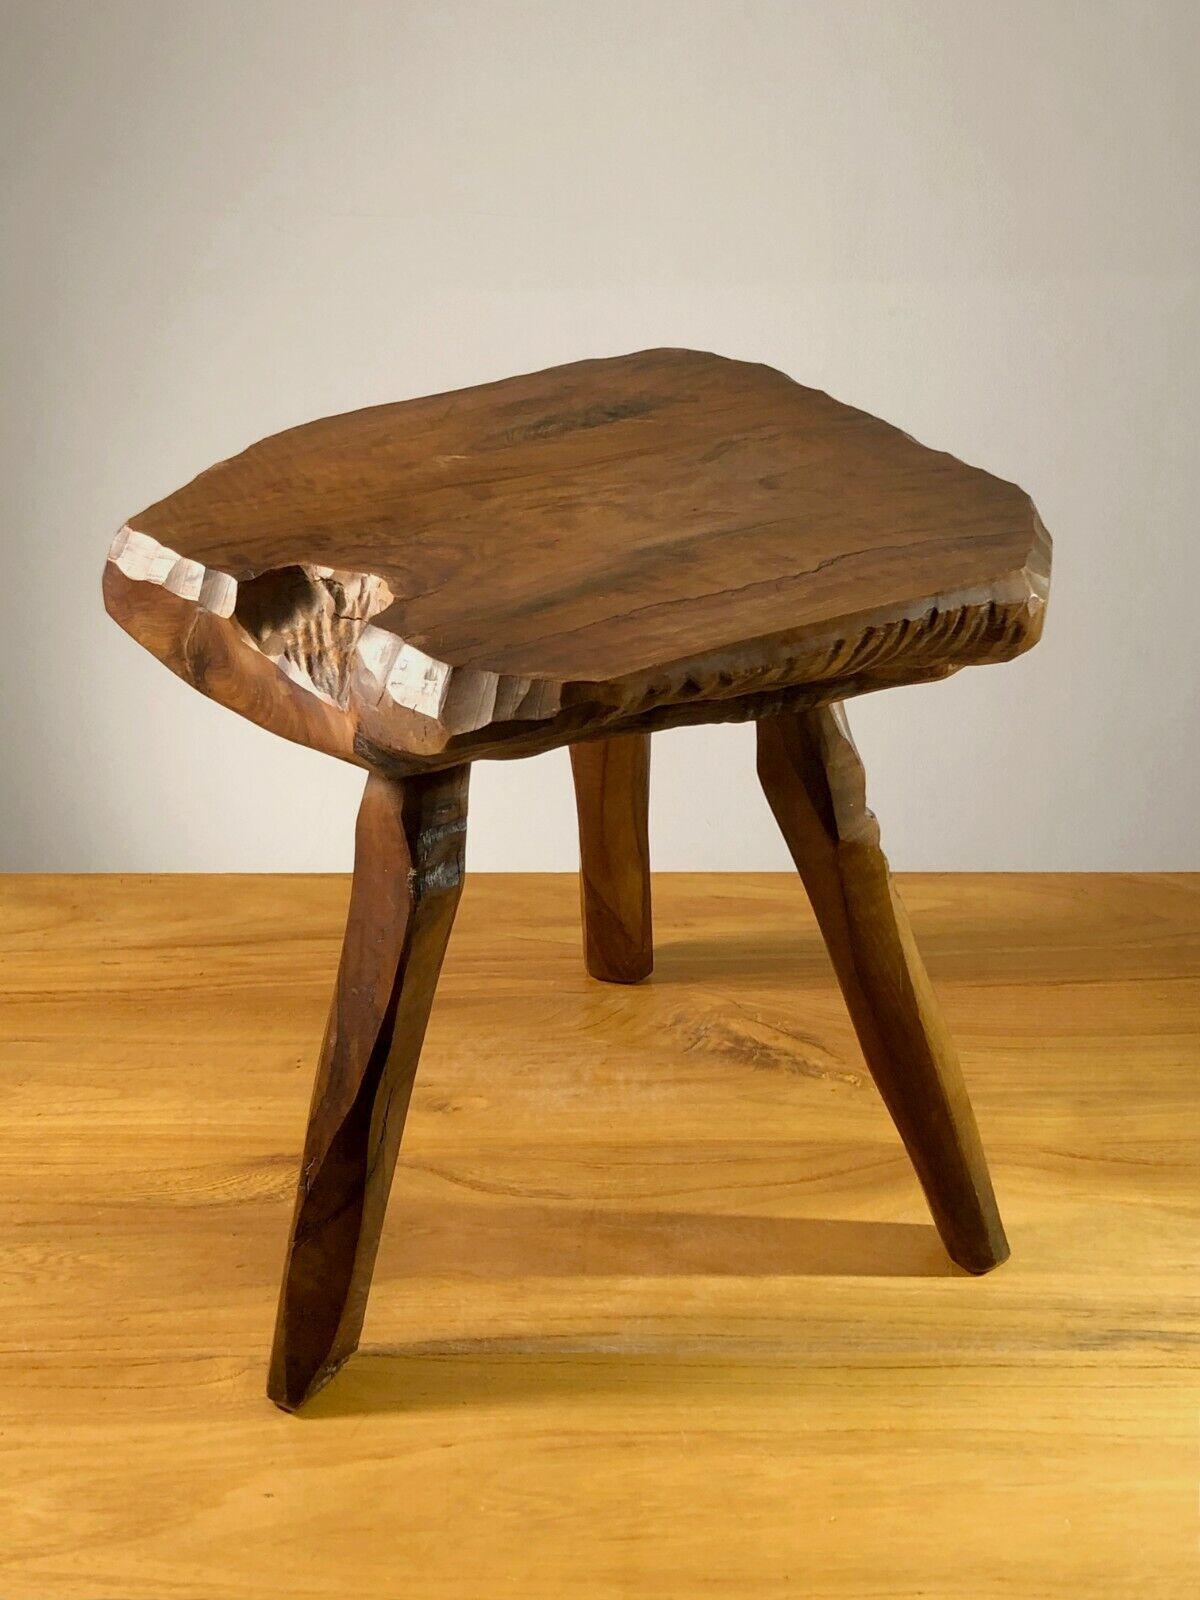 A BRUTALIST MID-CENTURY-MODERN RUSTIC STOOL, MAROLLES Style, France 1950 For Sale 2